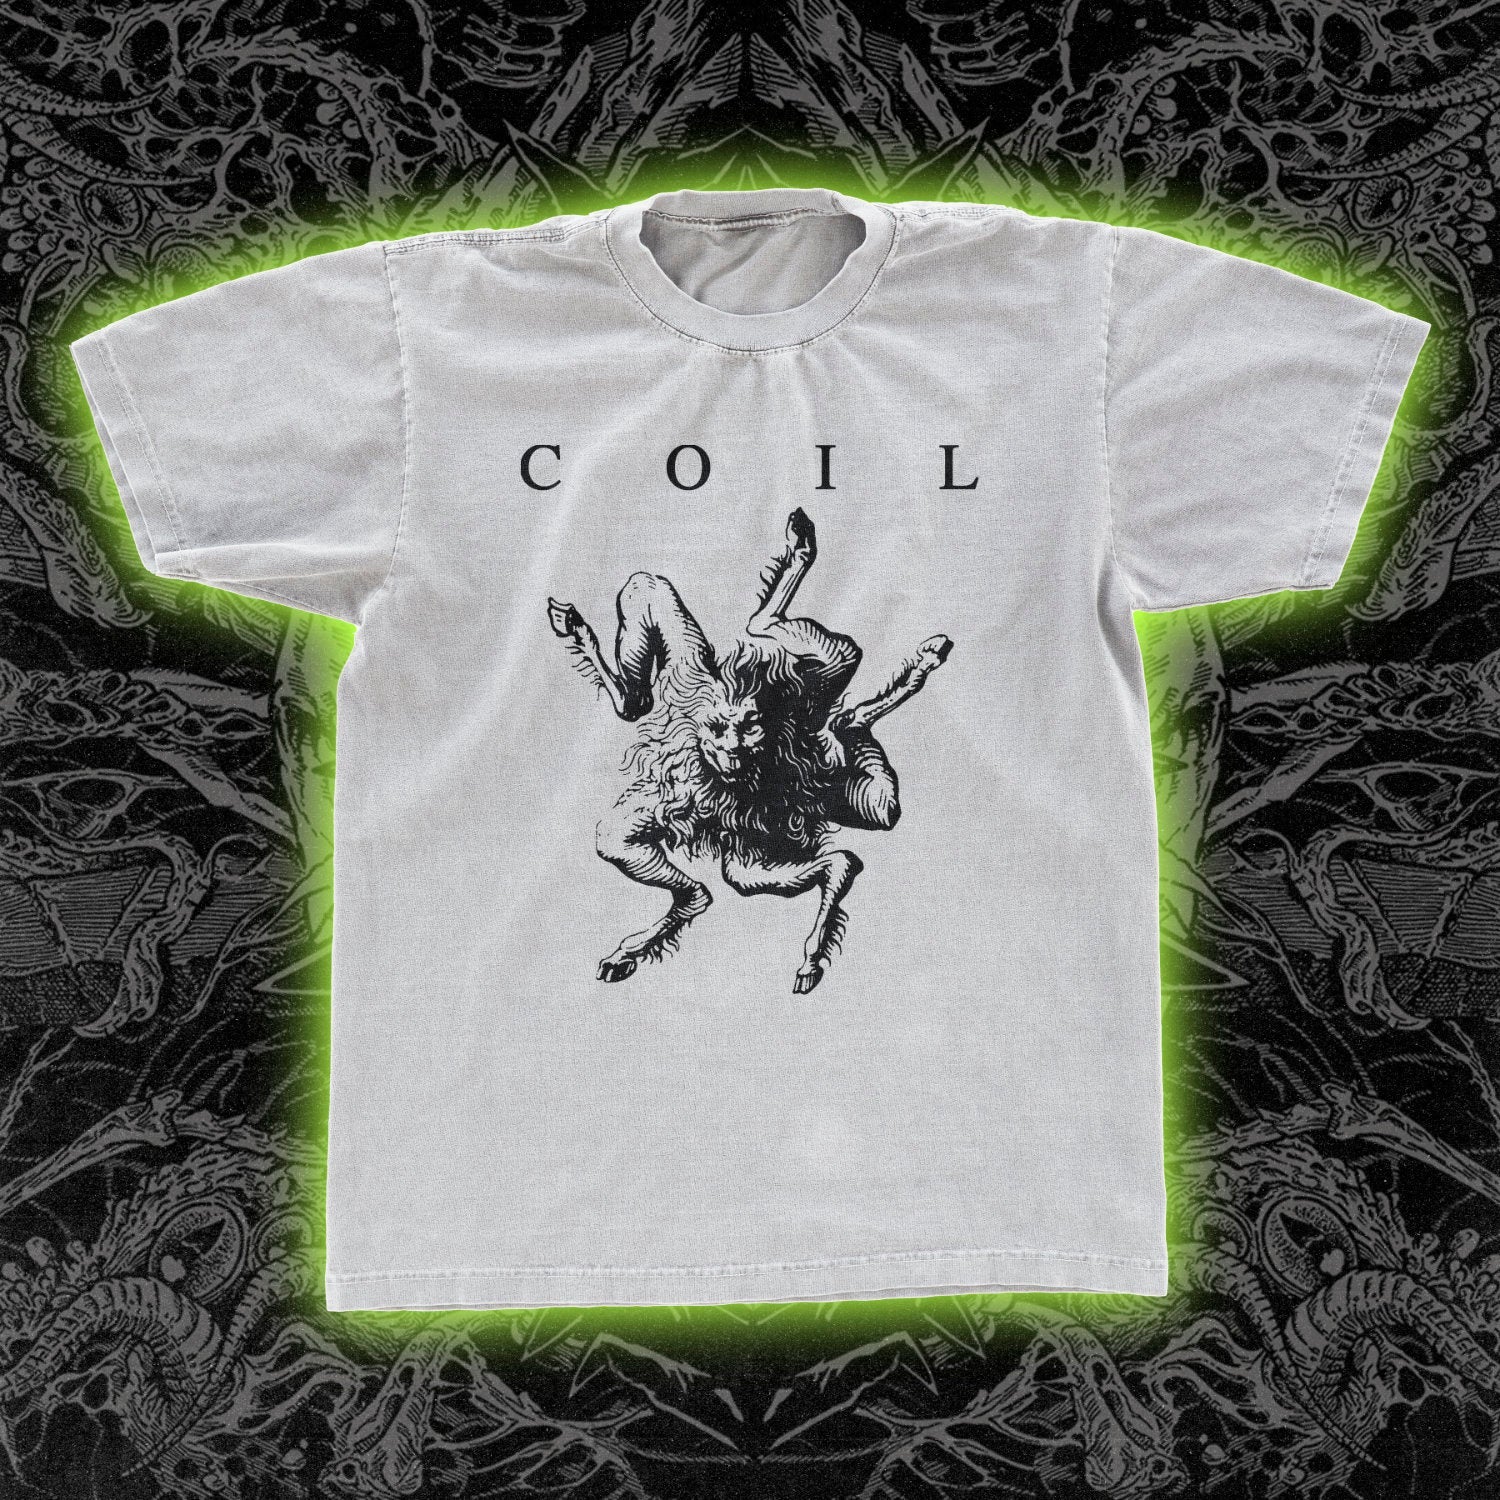 Coil Chaostrophy Classic Tee